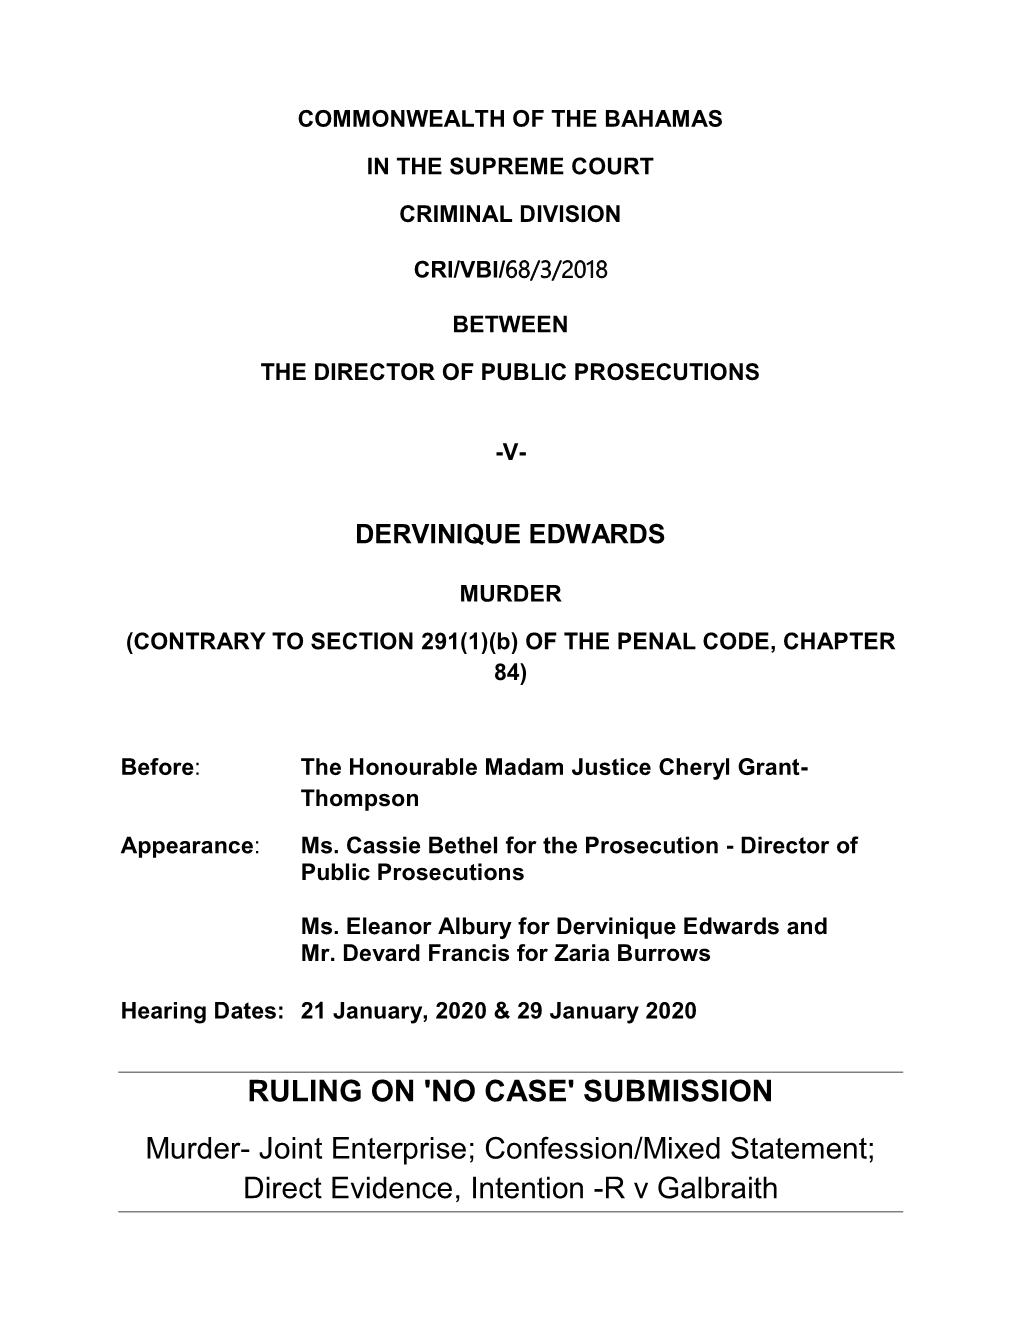 RULING on 'NO CASE' SUBMISSION Murder- Joint Enterprise; Confession/Mixed Statement; Direct Evidence, Intention -R V Galbraith